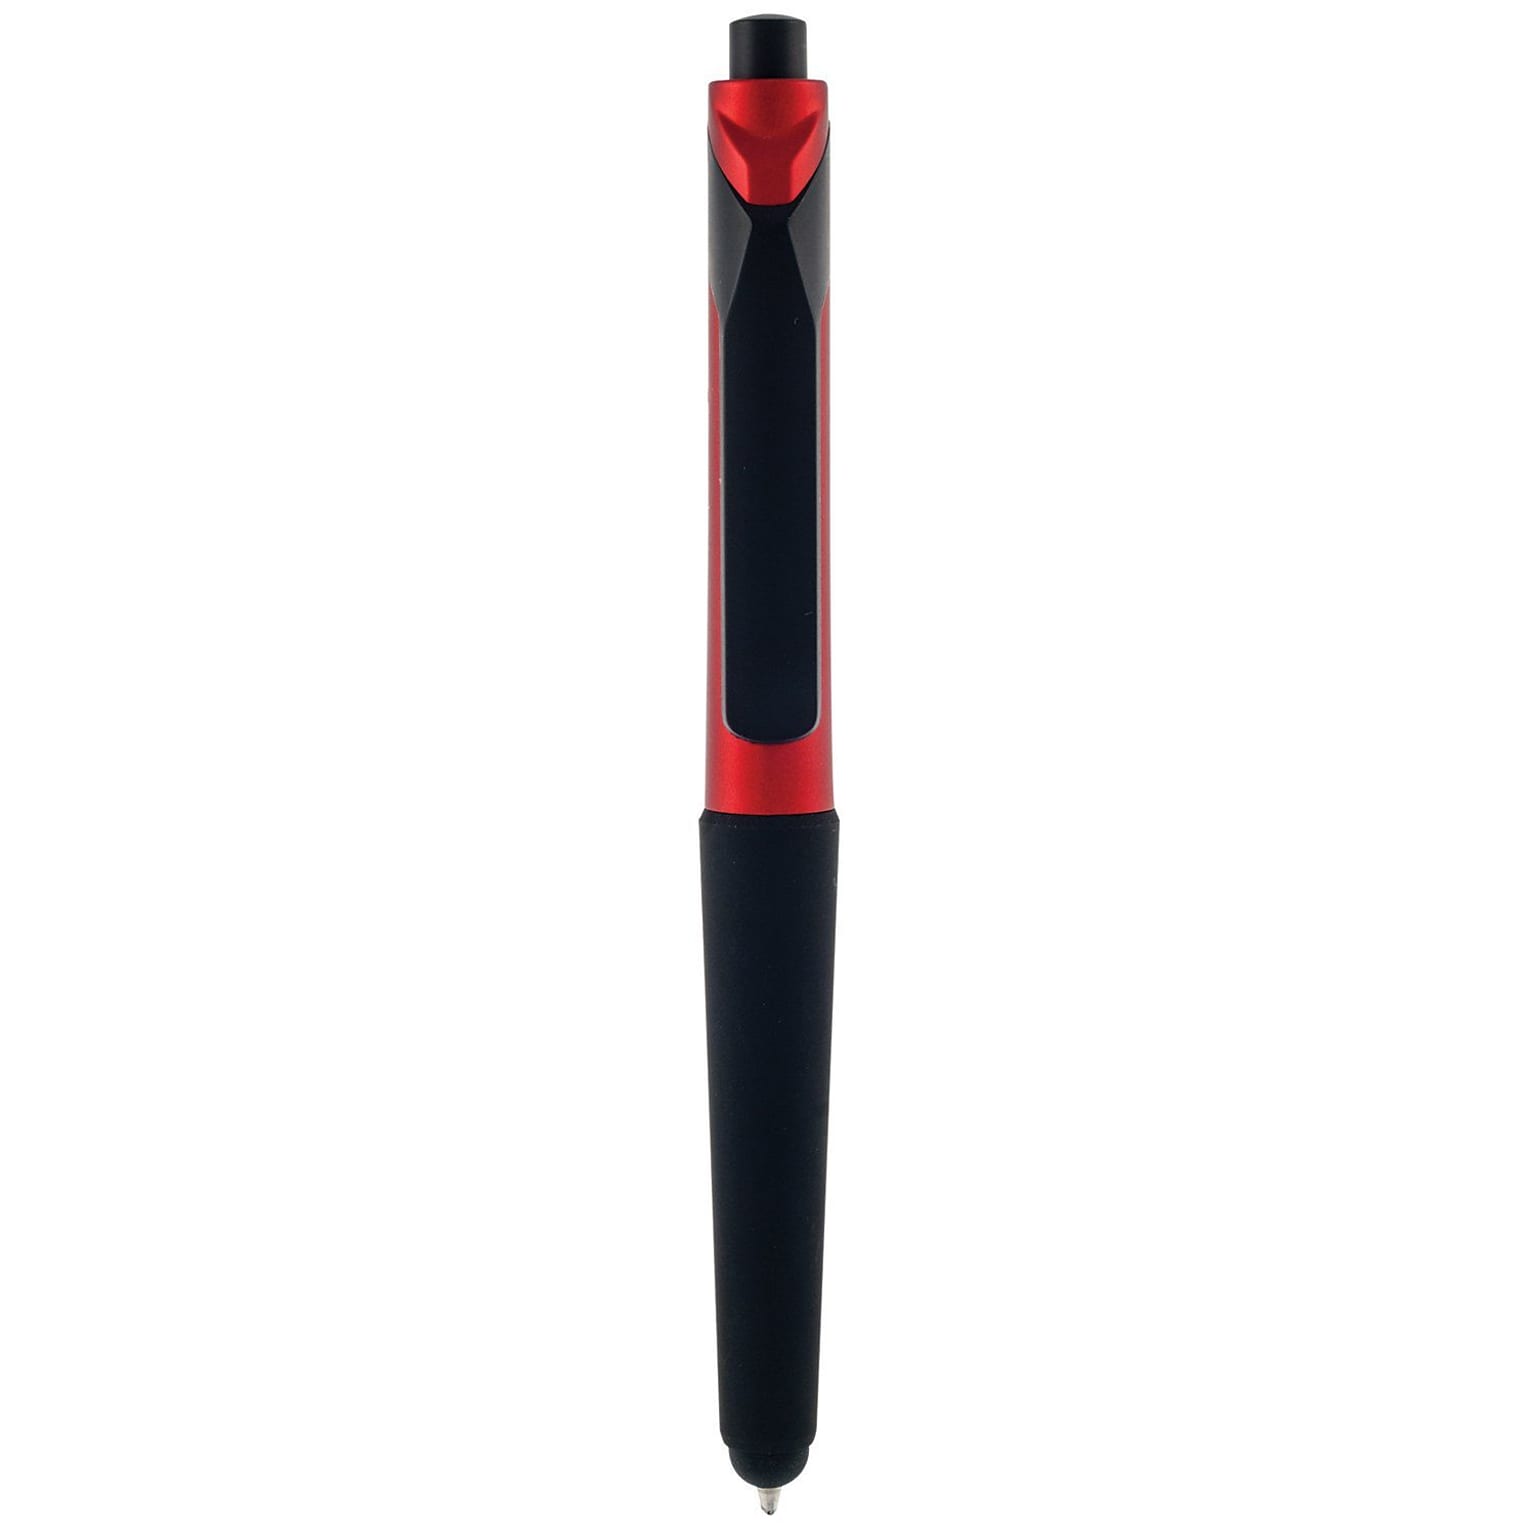 Monteverde S-106 Clip Action One-Touch Ballpoint Pen With Front Stylus, Red, 2/Pack (MV36039)